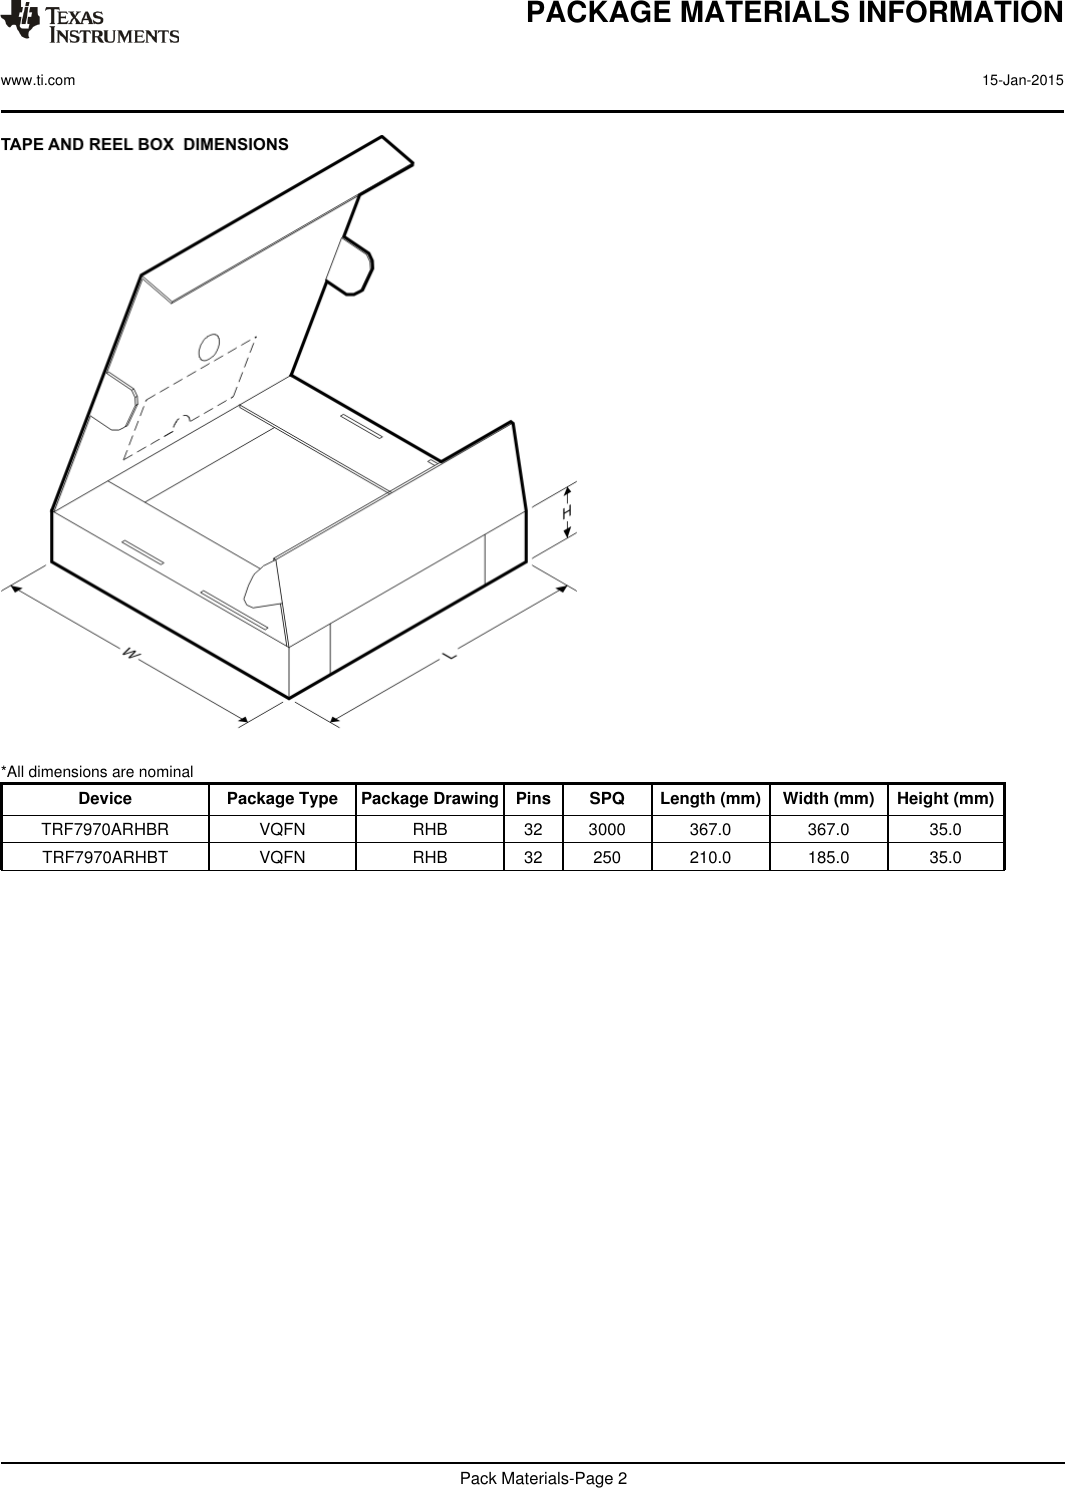 *All dimensions are nominalDevice Package Type Package Drawing Pins SPQ Length (mm) Width (mm) Height (mm)TRF7970ARHBR VQFN RHB 32 3000 367.0 367.0 35.0TRF7970ARHBT VQFN RHB 32 250 210.0 185.0 35.0PACKAGE MATERIALS INFORMATIONwww.ti.com 15-Jan-2015Pack Materials-Page 2